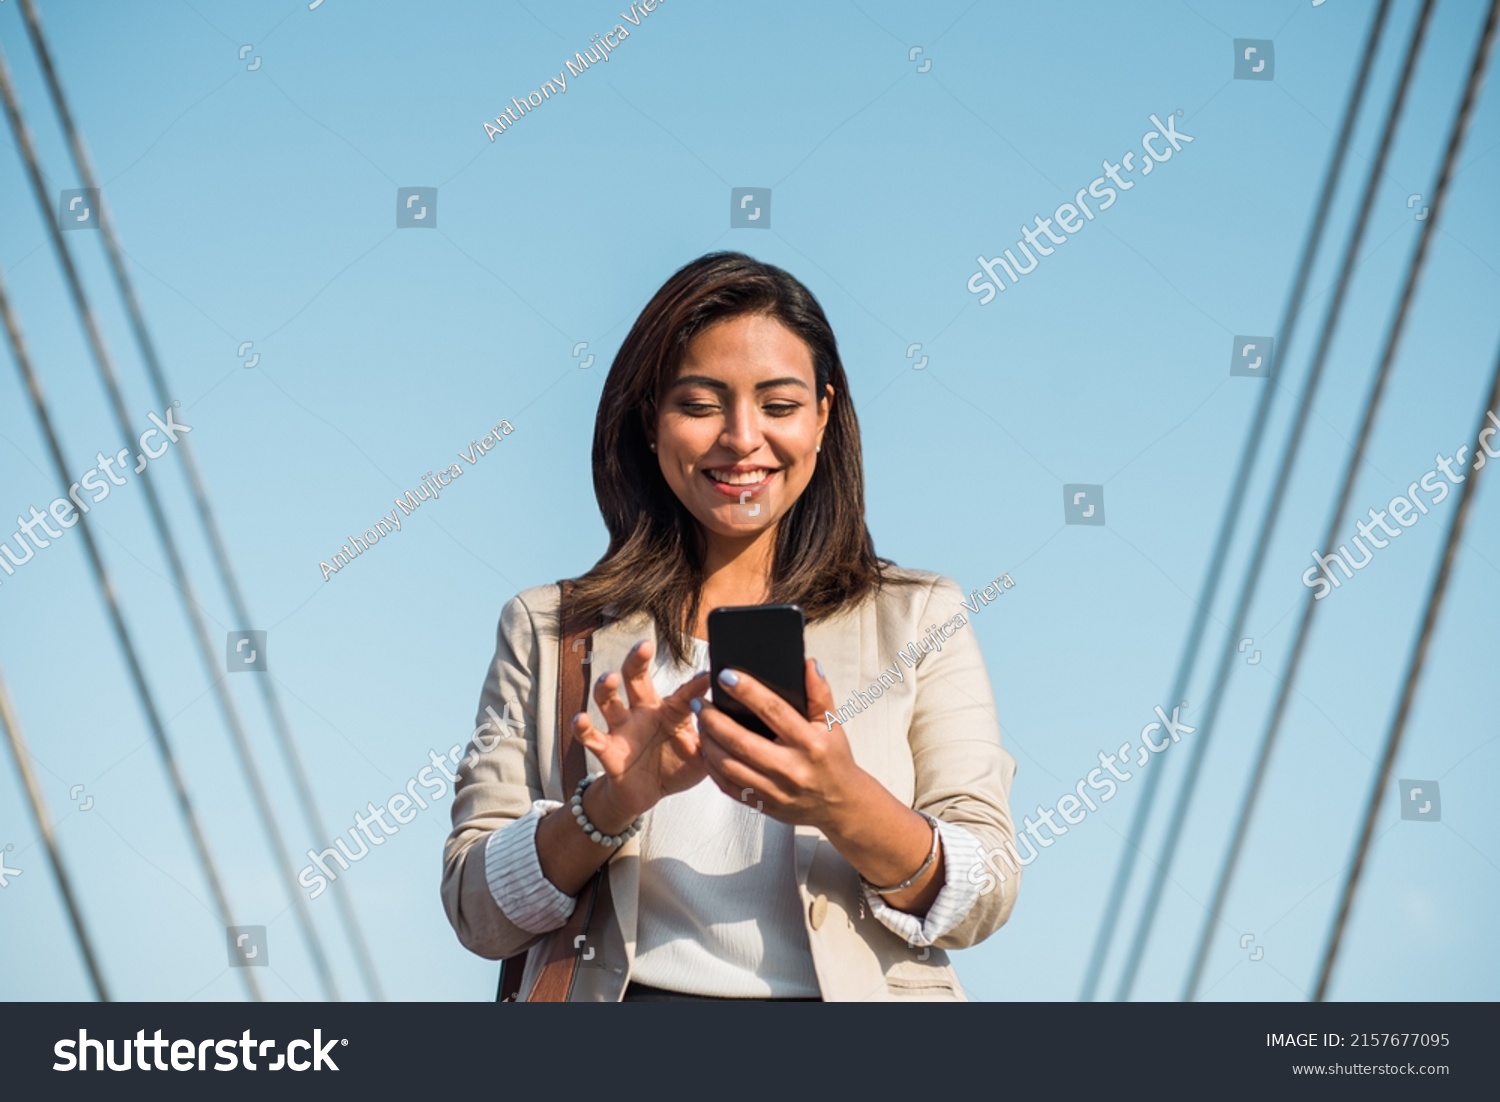 A happy elegant young woman stands and uses her phone to type an important message. A businesswoman using technologies outdoors. #2157677095